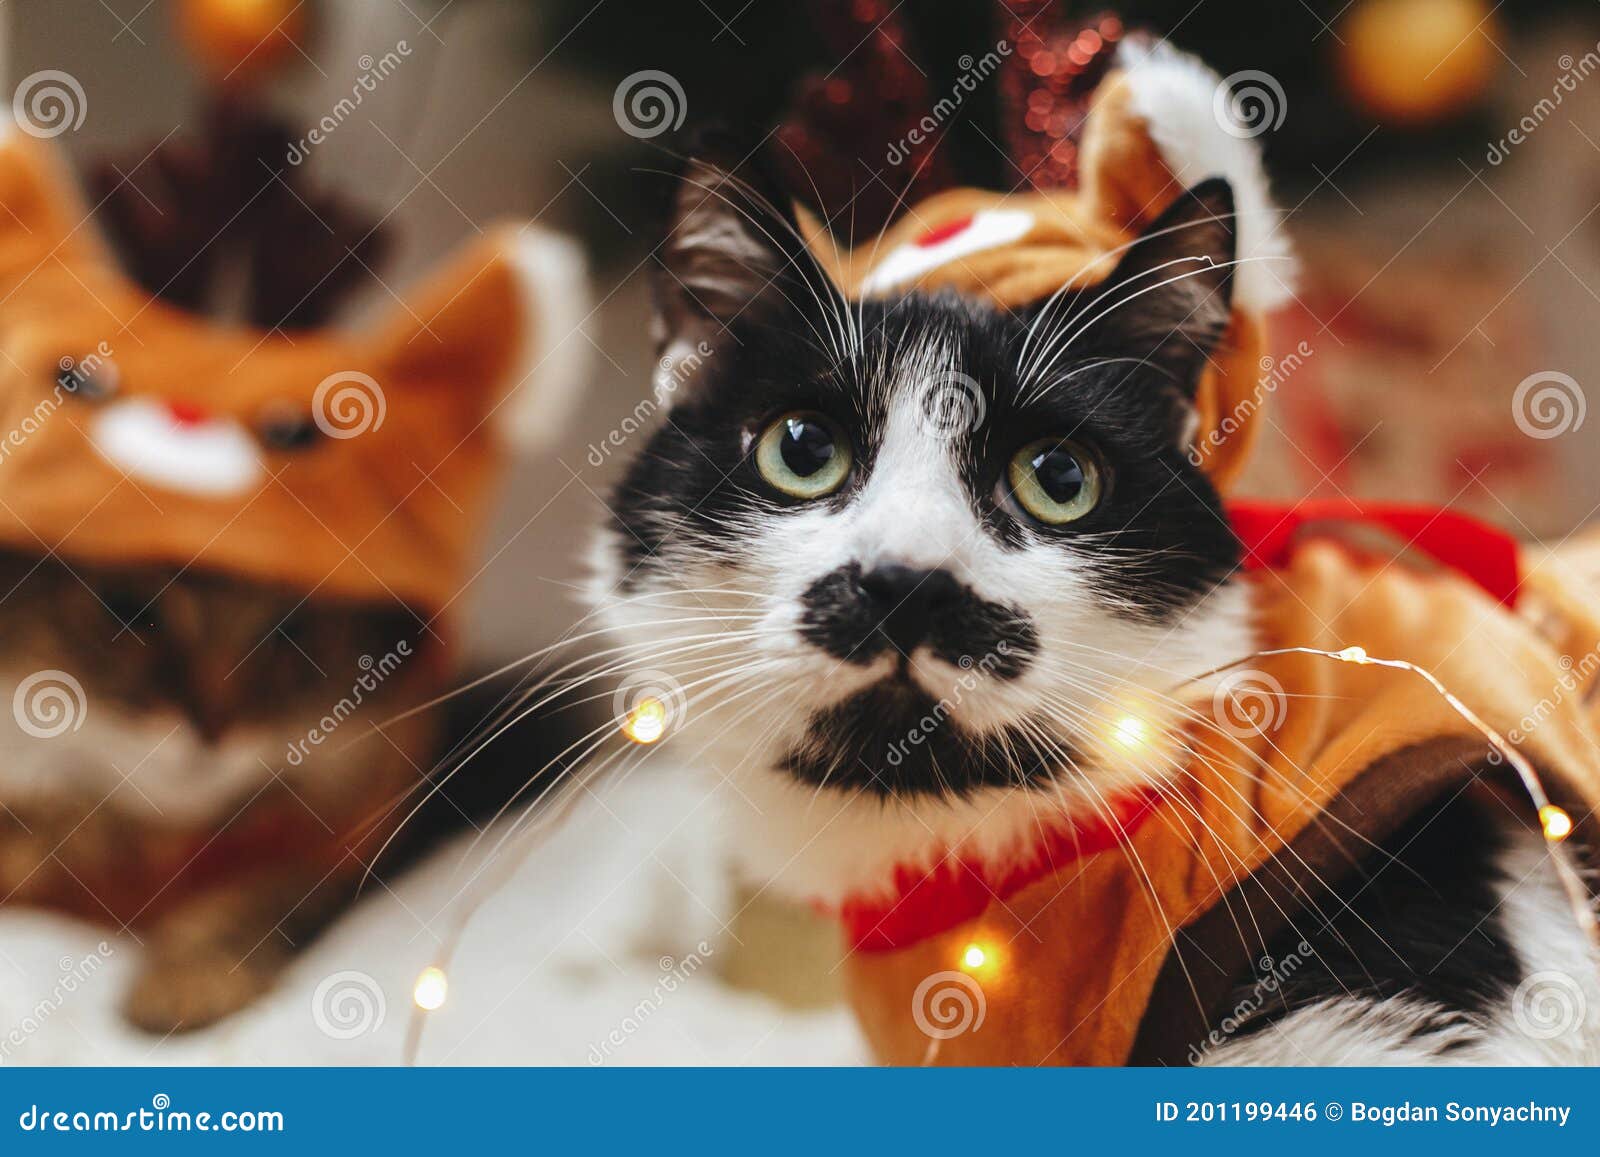 1,133 Cats Clothes Stock - Free & Royalty-Free Stock Photos from Dreamstime